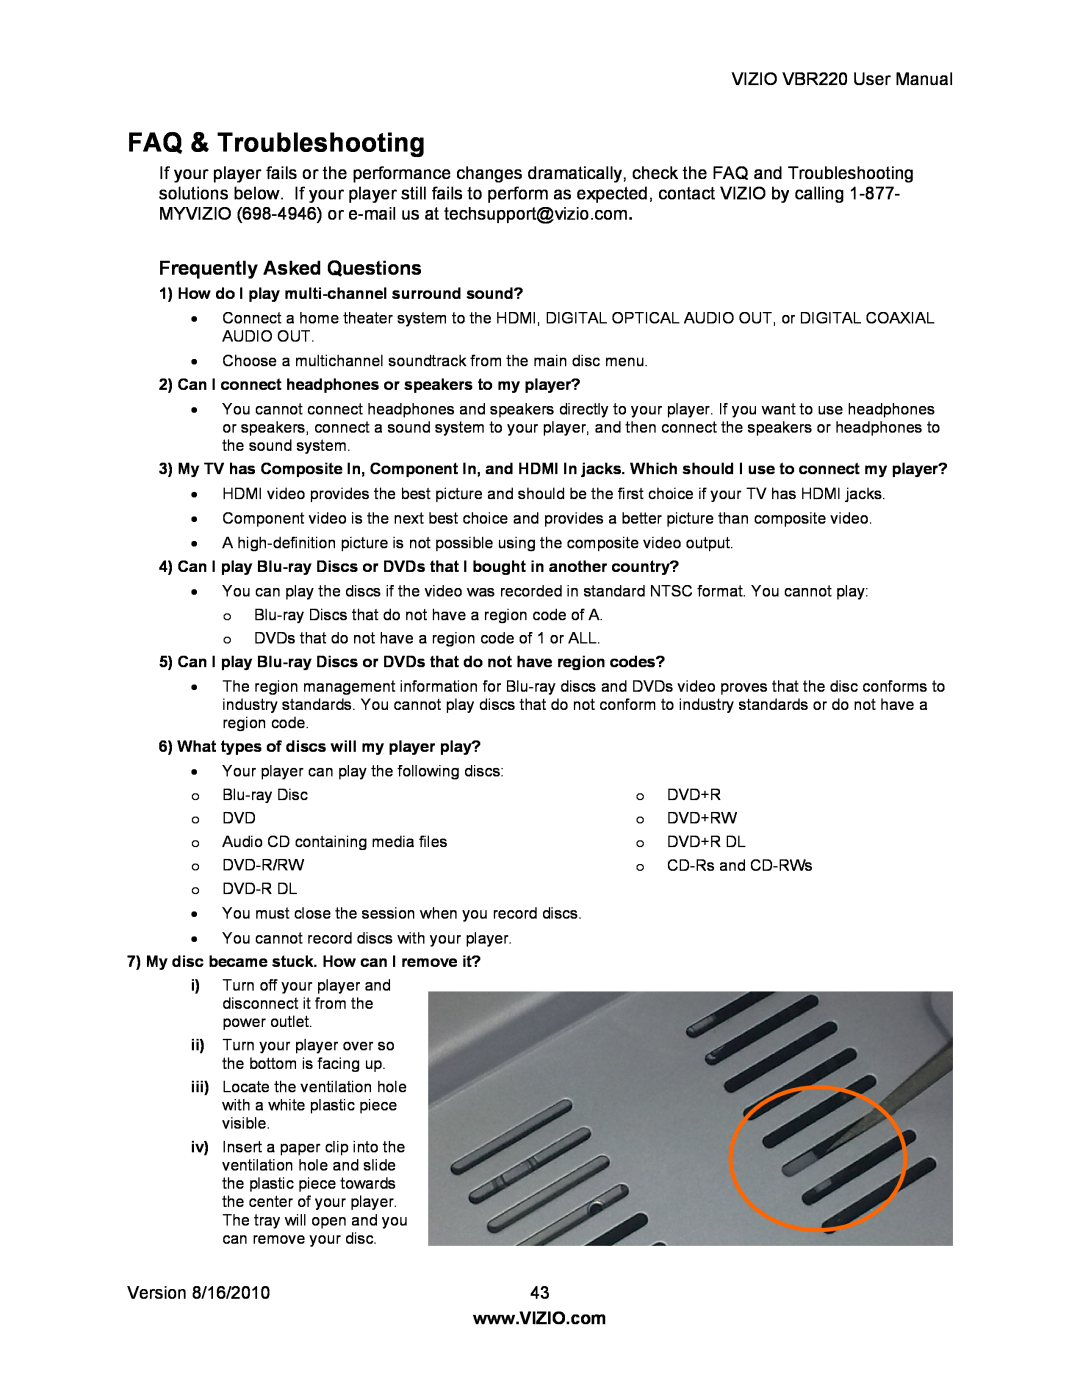 Panasonic VBR220 user manual FAQ & Troubleshooting, Frequently Asked Questions, How do I play multi-channel surround sound? 